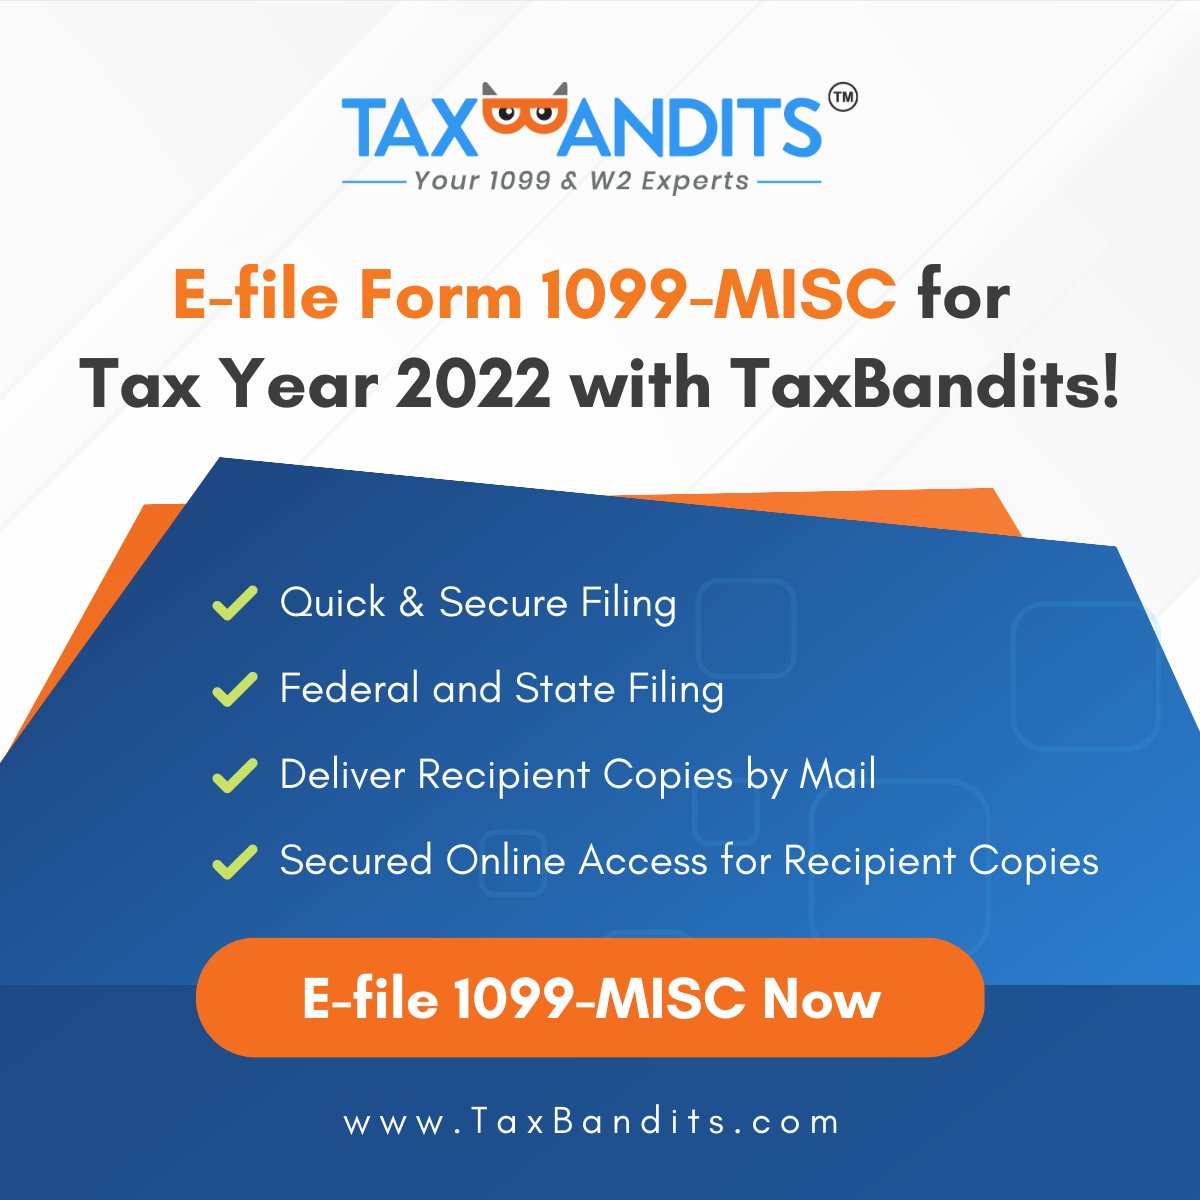 The deadline to e-file Form 1099-MISC and more is coming up at the end of the month!

Get started with TaxBandits today to meet your deadline. 

bit.ly/3oOvM6n 

#TaxBandits #form1099 #form1099MISC #1099Efilingdeadline #deadline